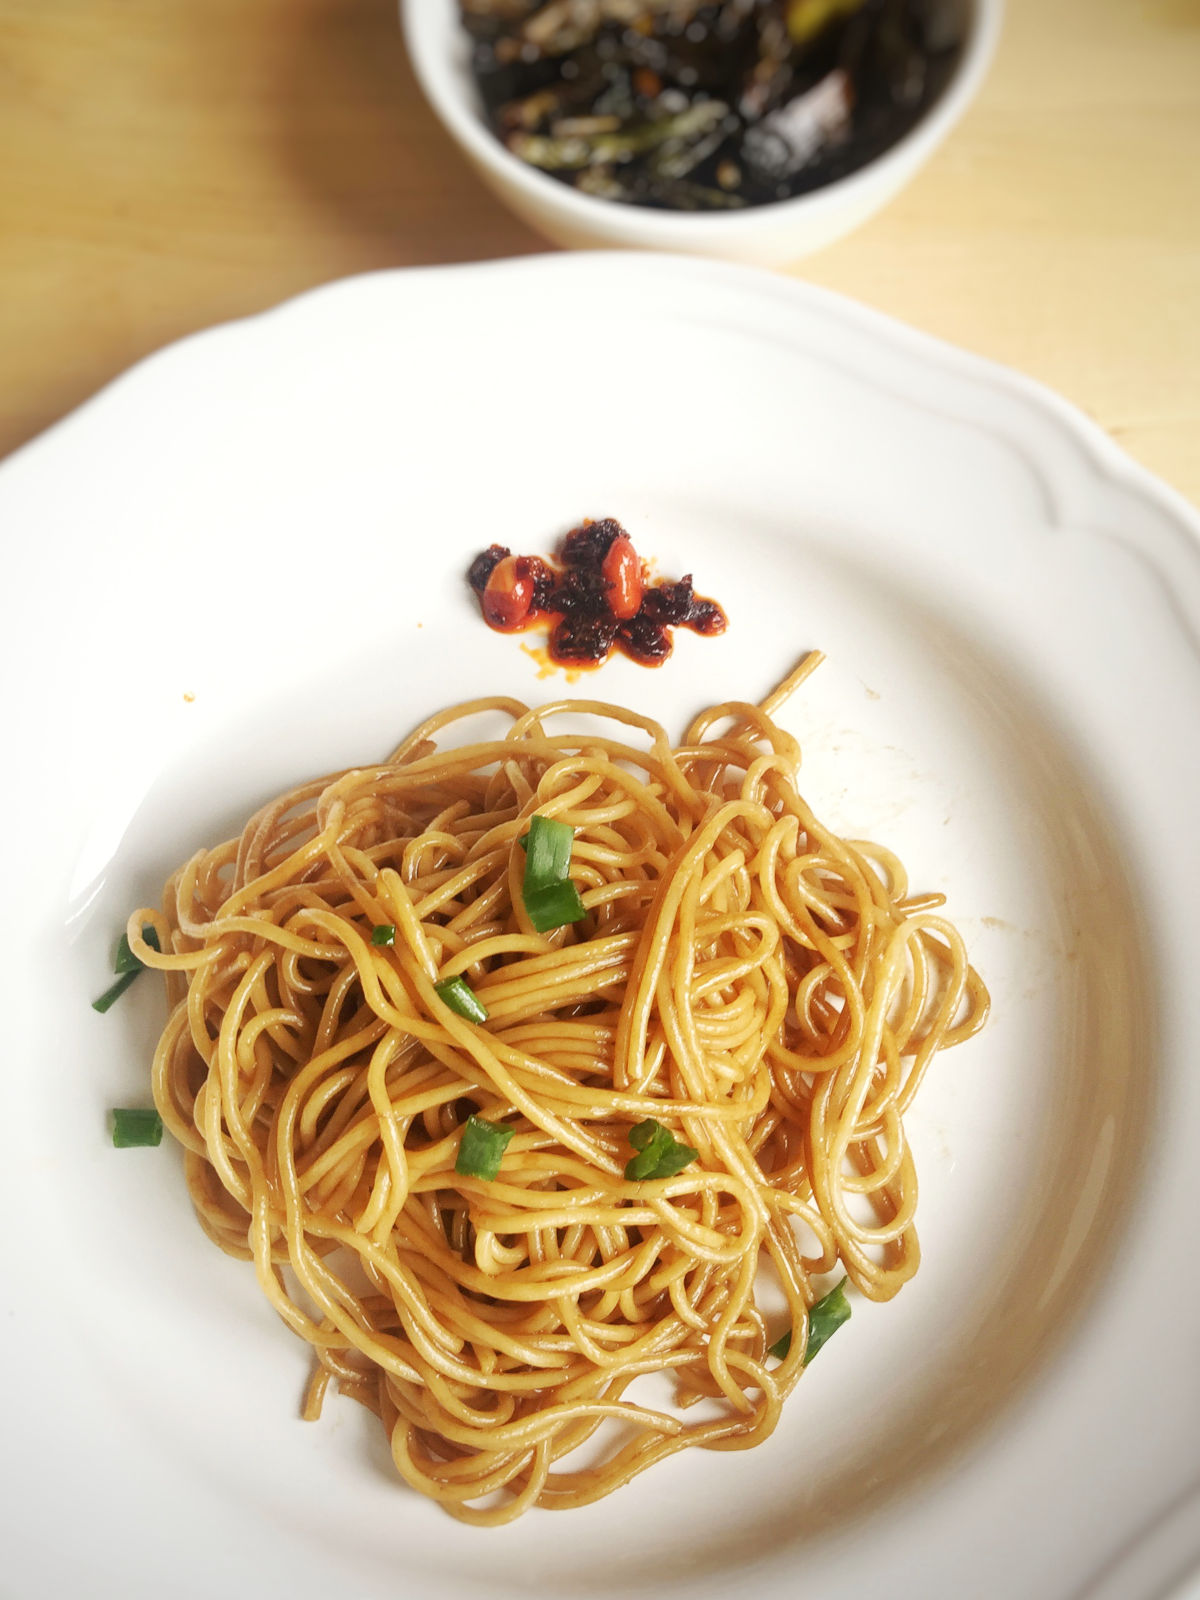 Overhead view of a white plate full of scallion oil pasta topped with finely chopped scallion and a teaspoon of Lao Gan Ma chili crisp on the side. Next to the cooked scallions placed in a small white bowl.